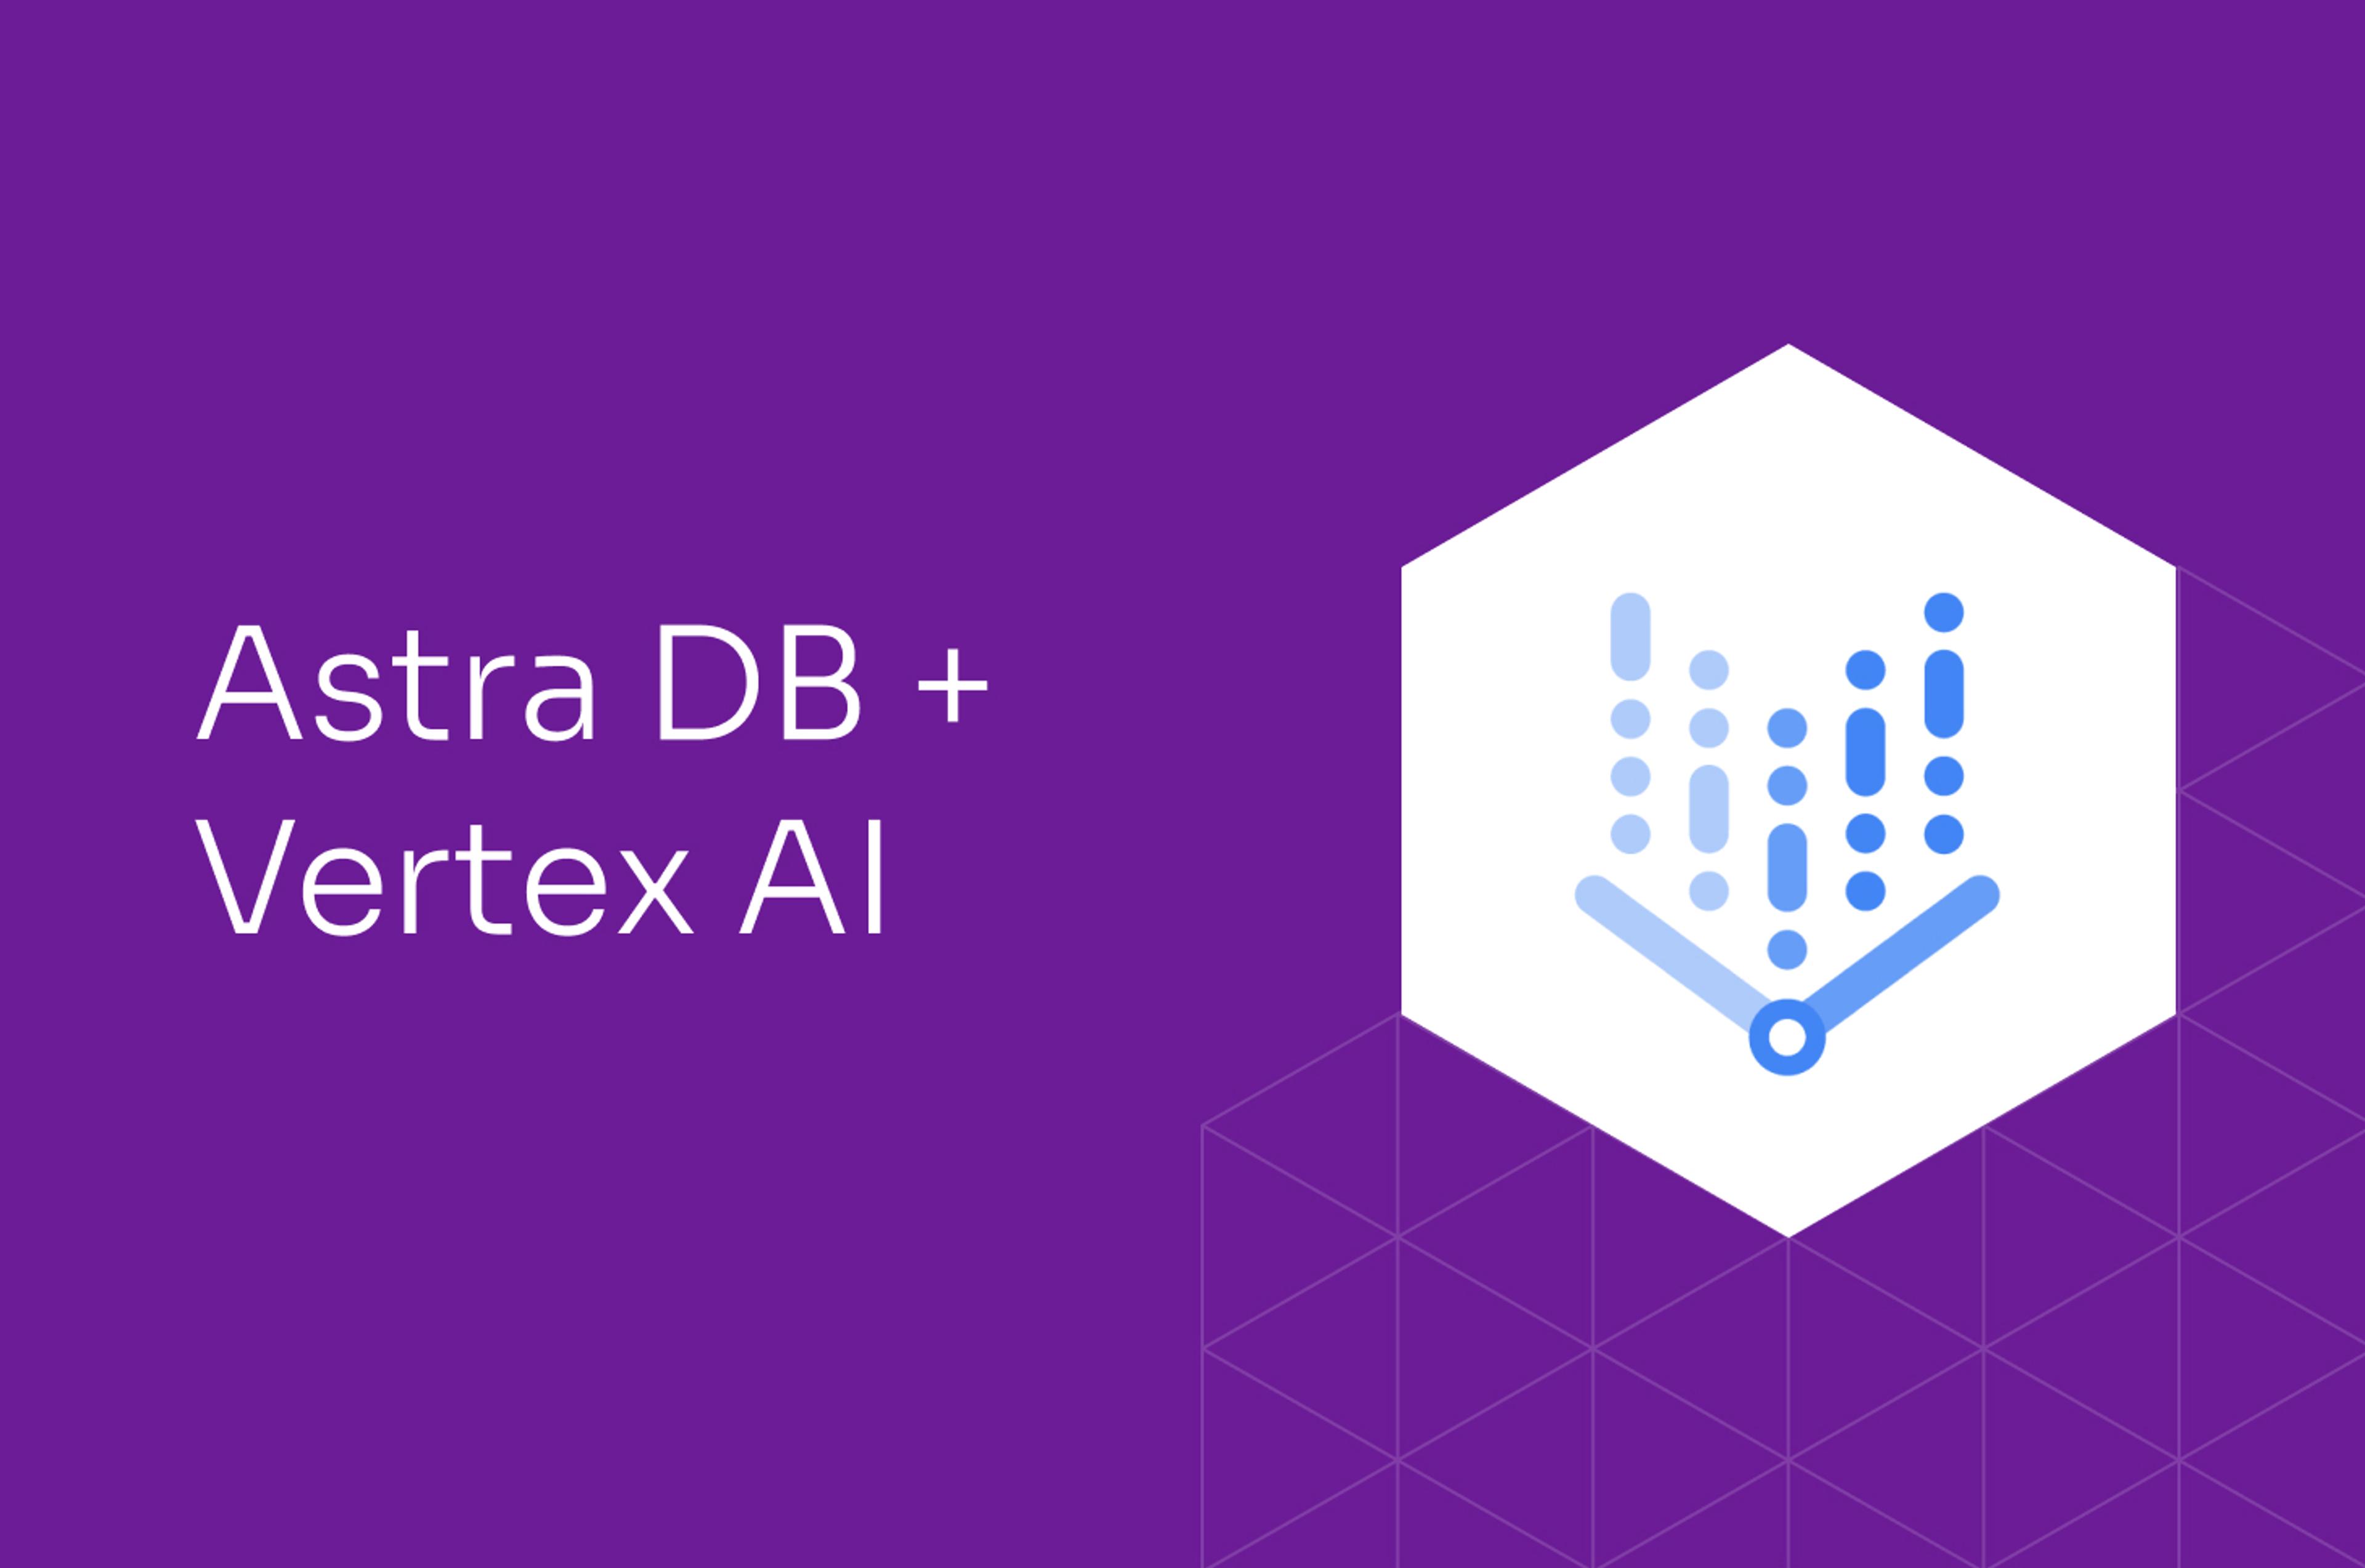 DataStax Unveils Vertex AI Extension: Empowering LLMs with Direct Astra DB Access